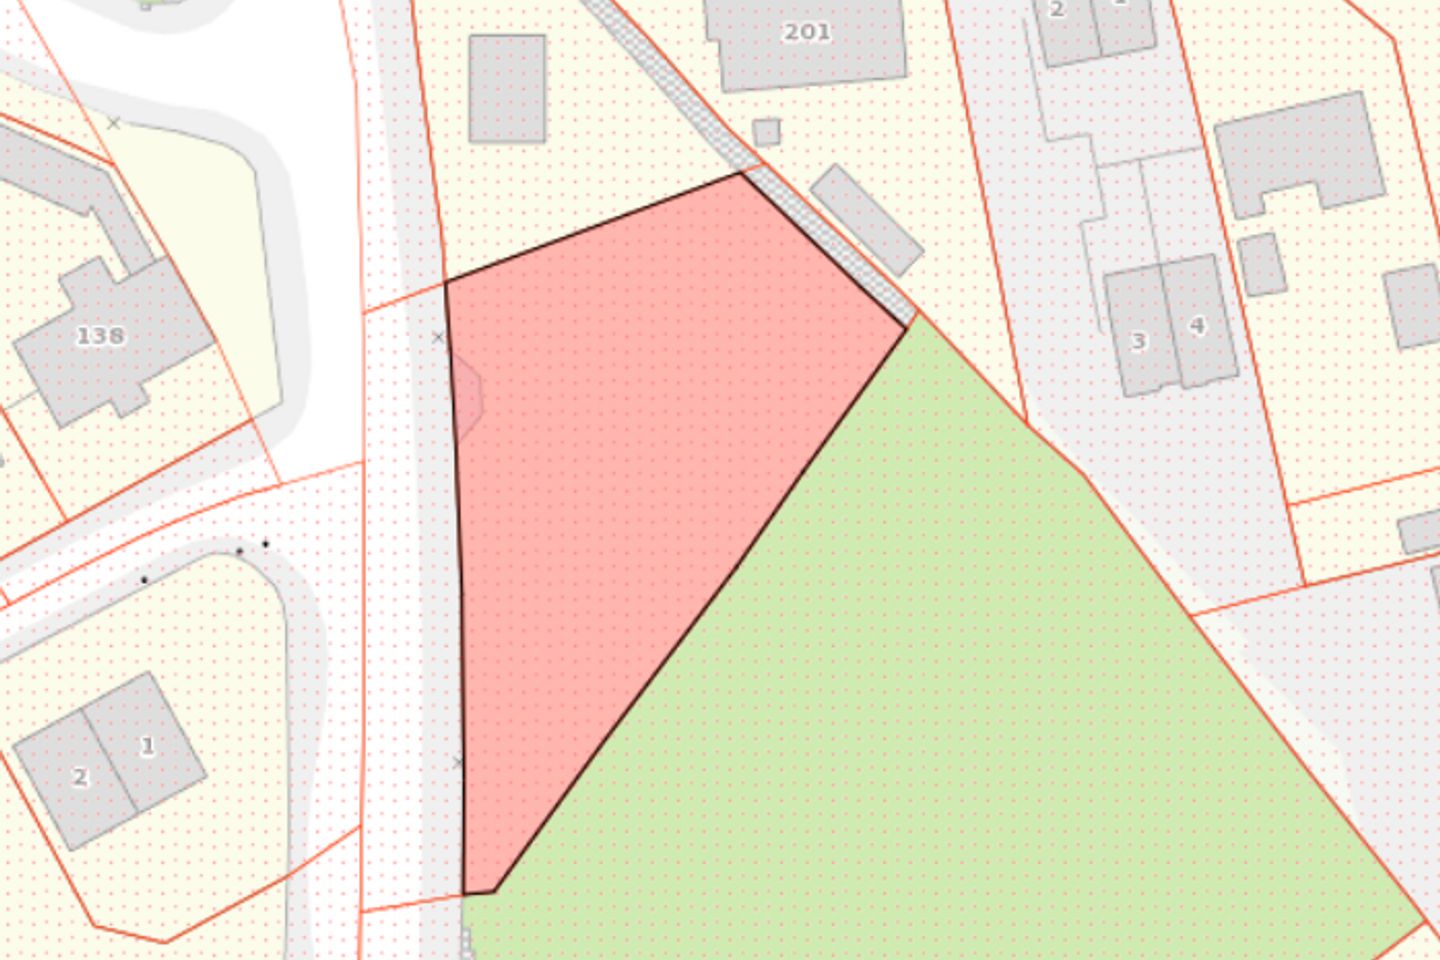 0.4 Acre Site, Straffan Road, Maynooth, Co. Kildare